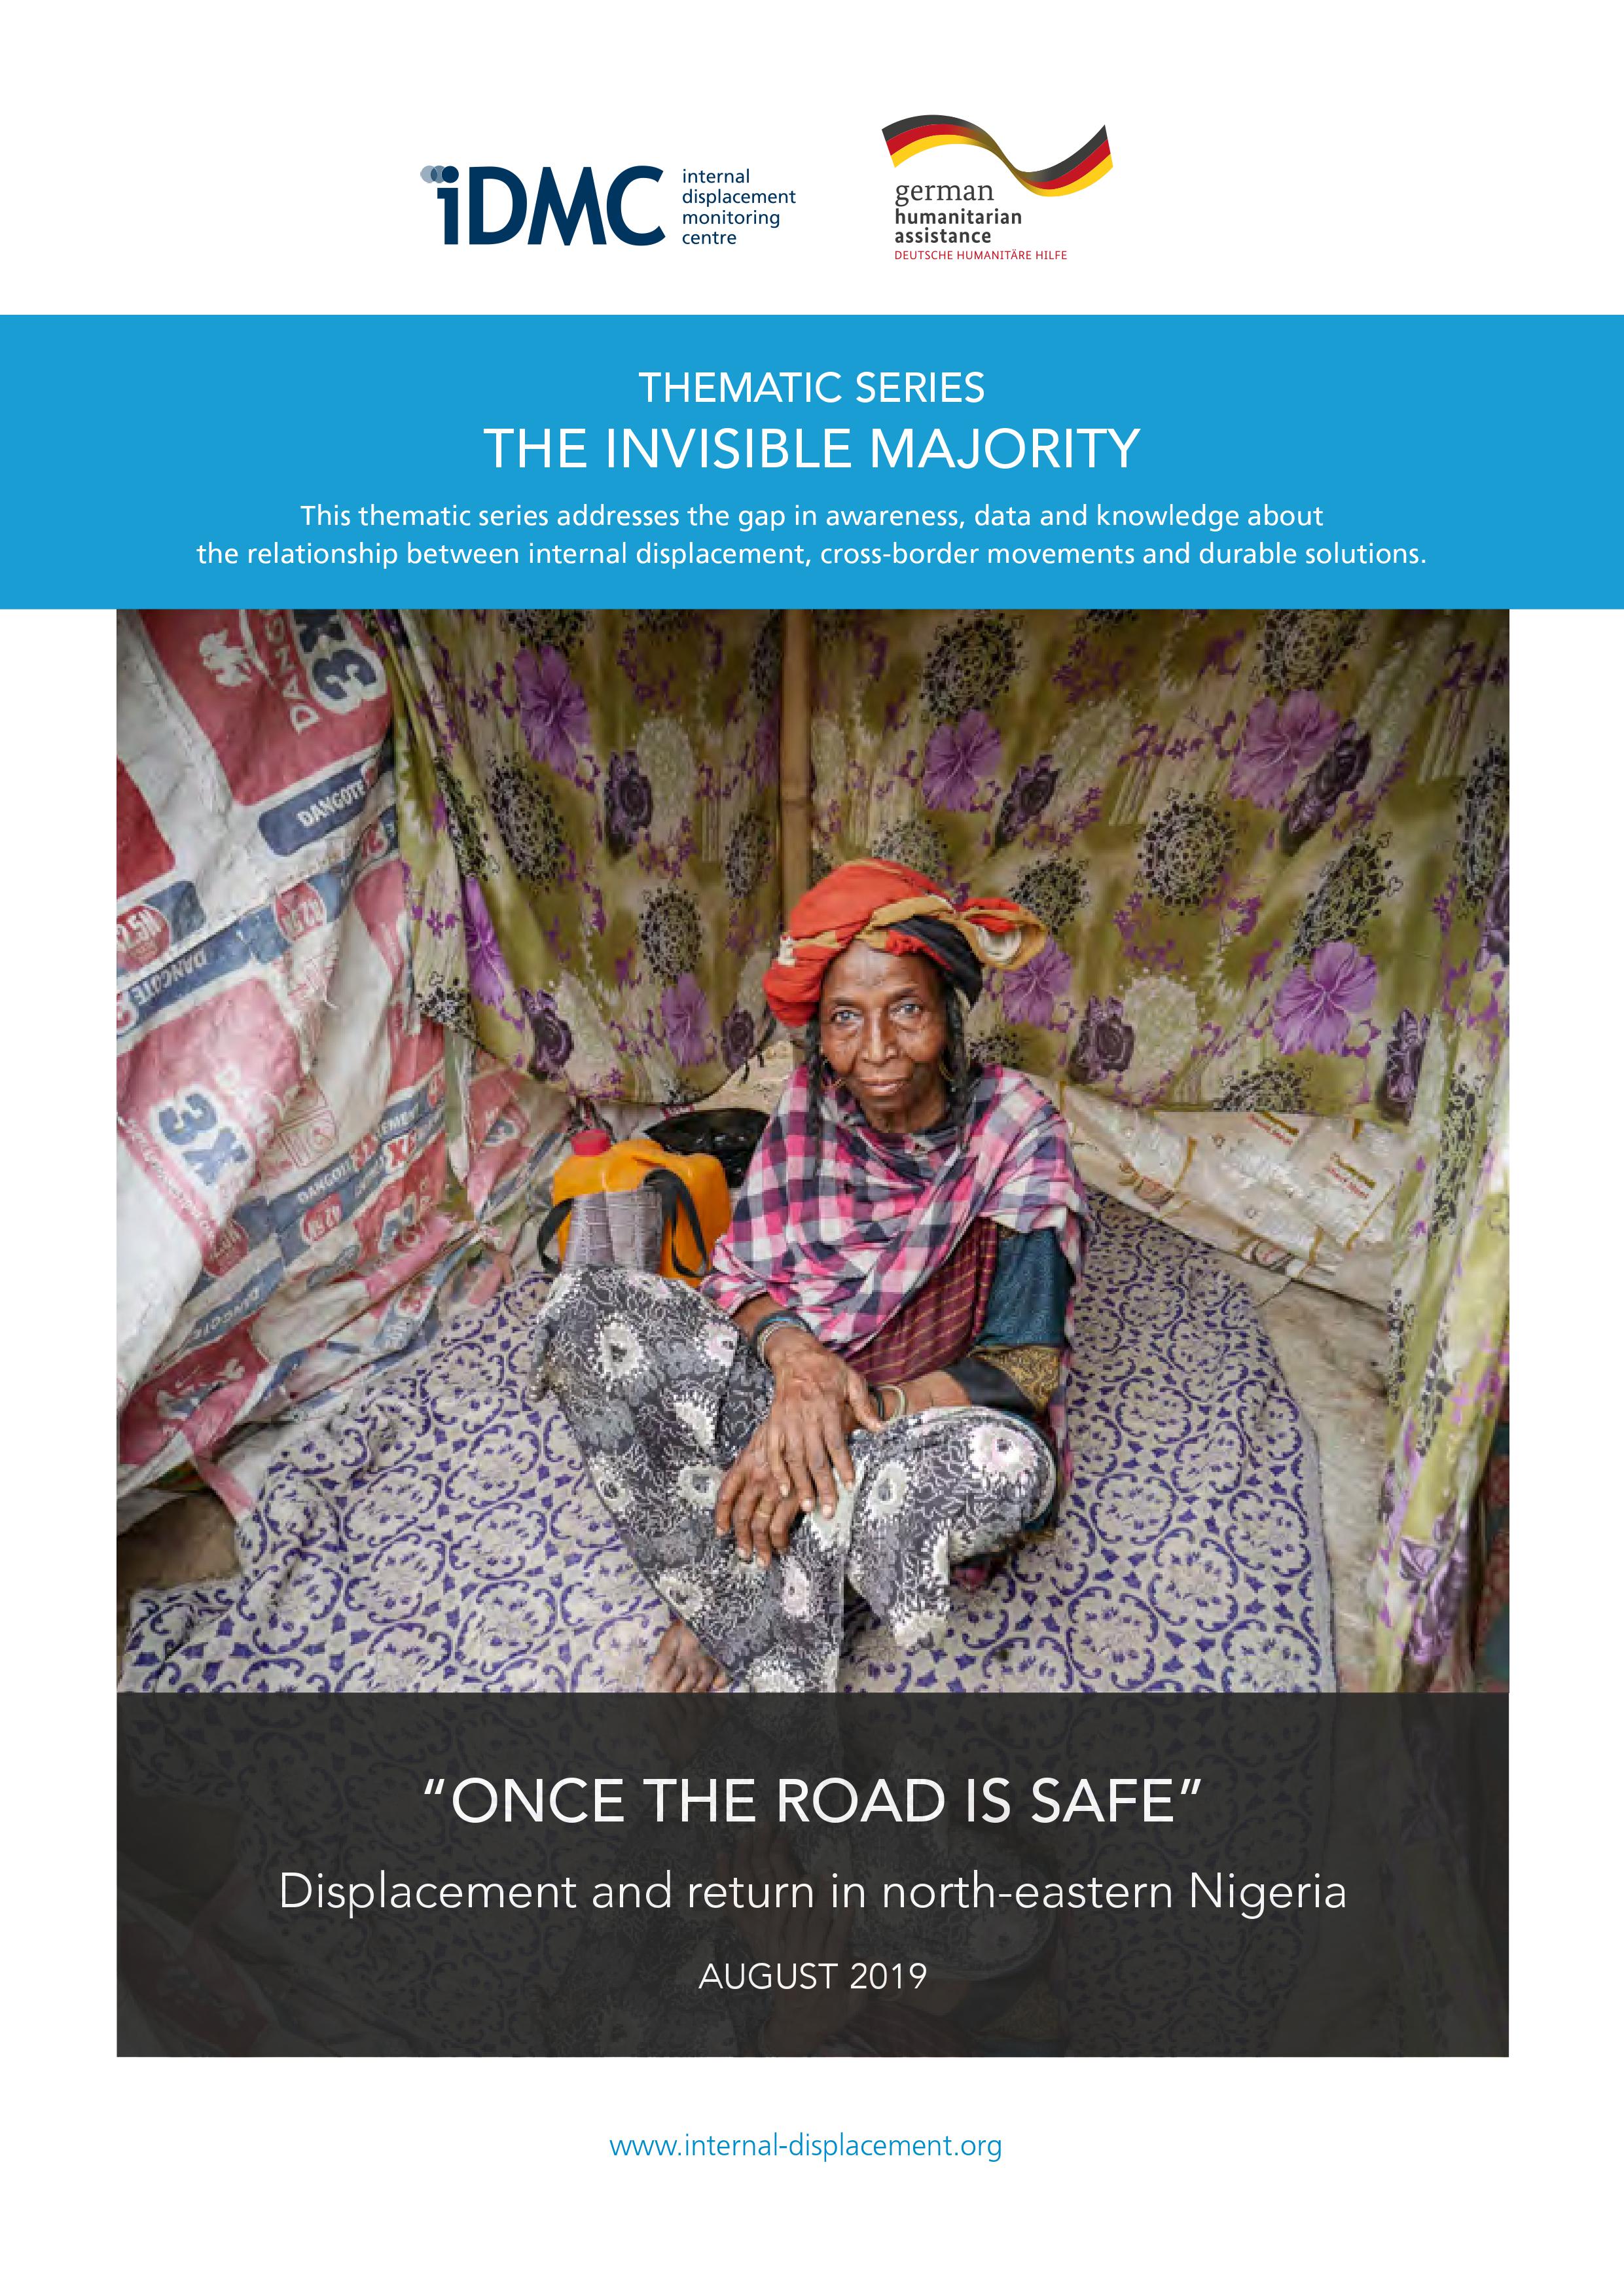 "Once the road is safe" - Displacement and return in north-eastern Nigeria